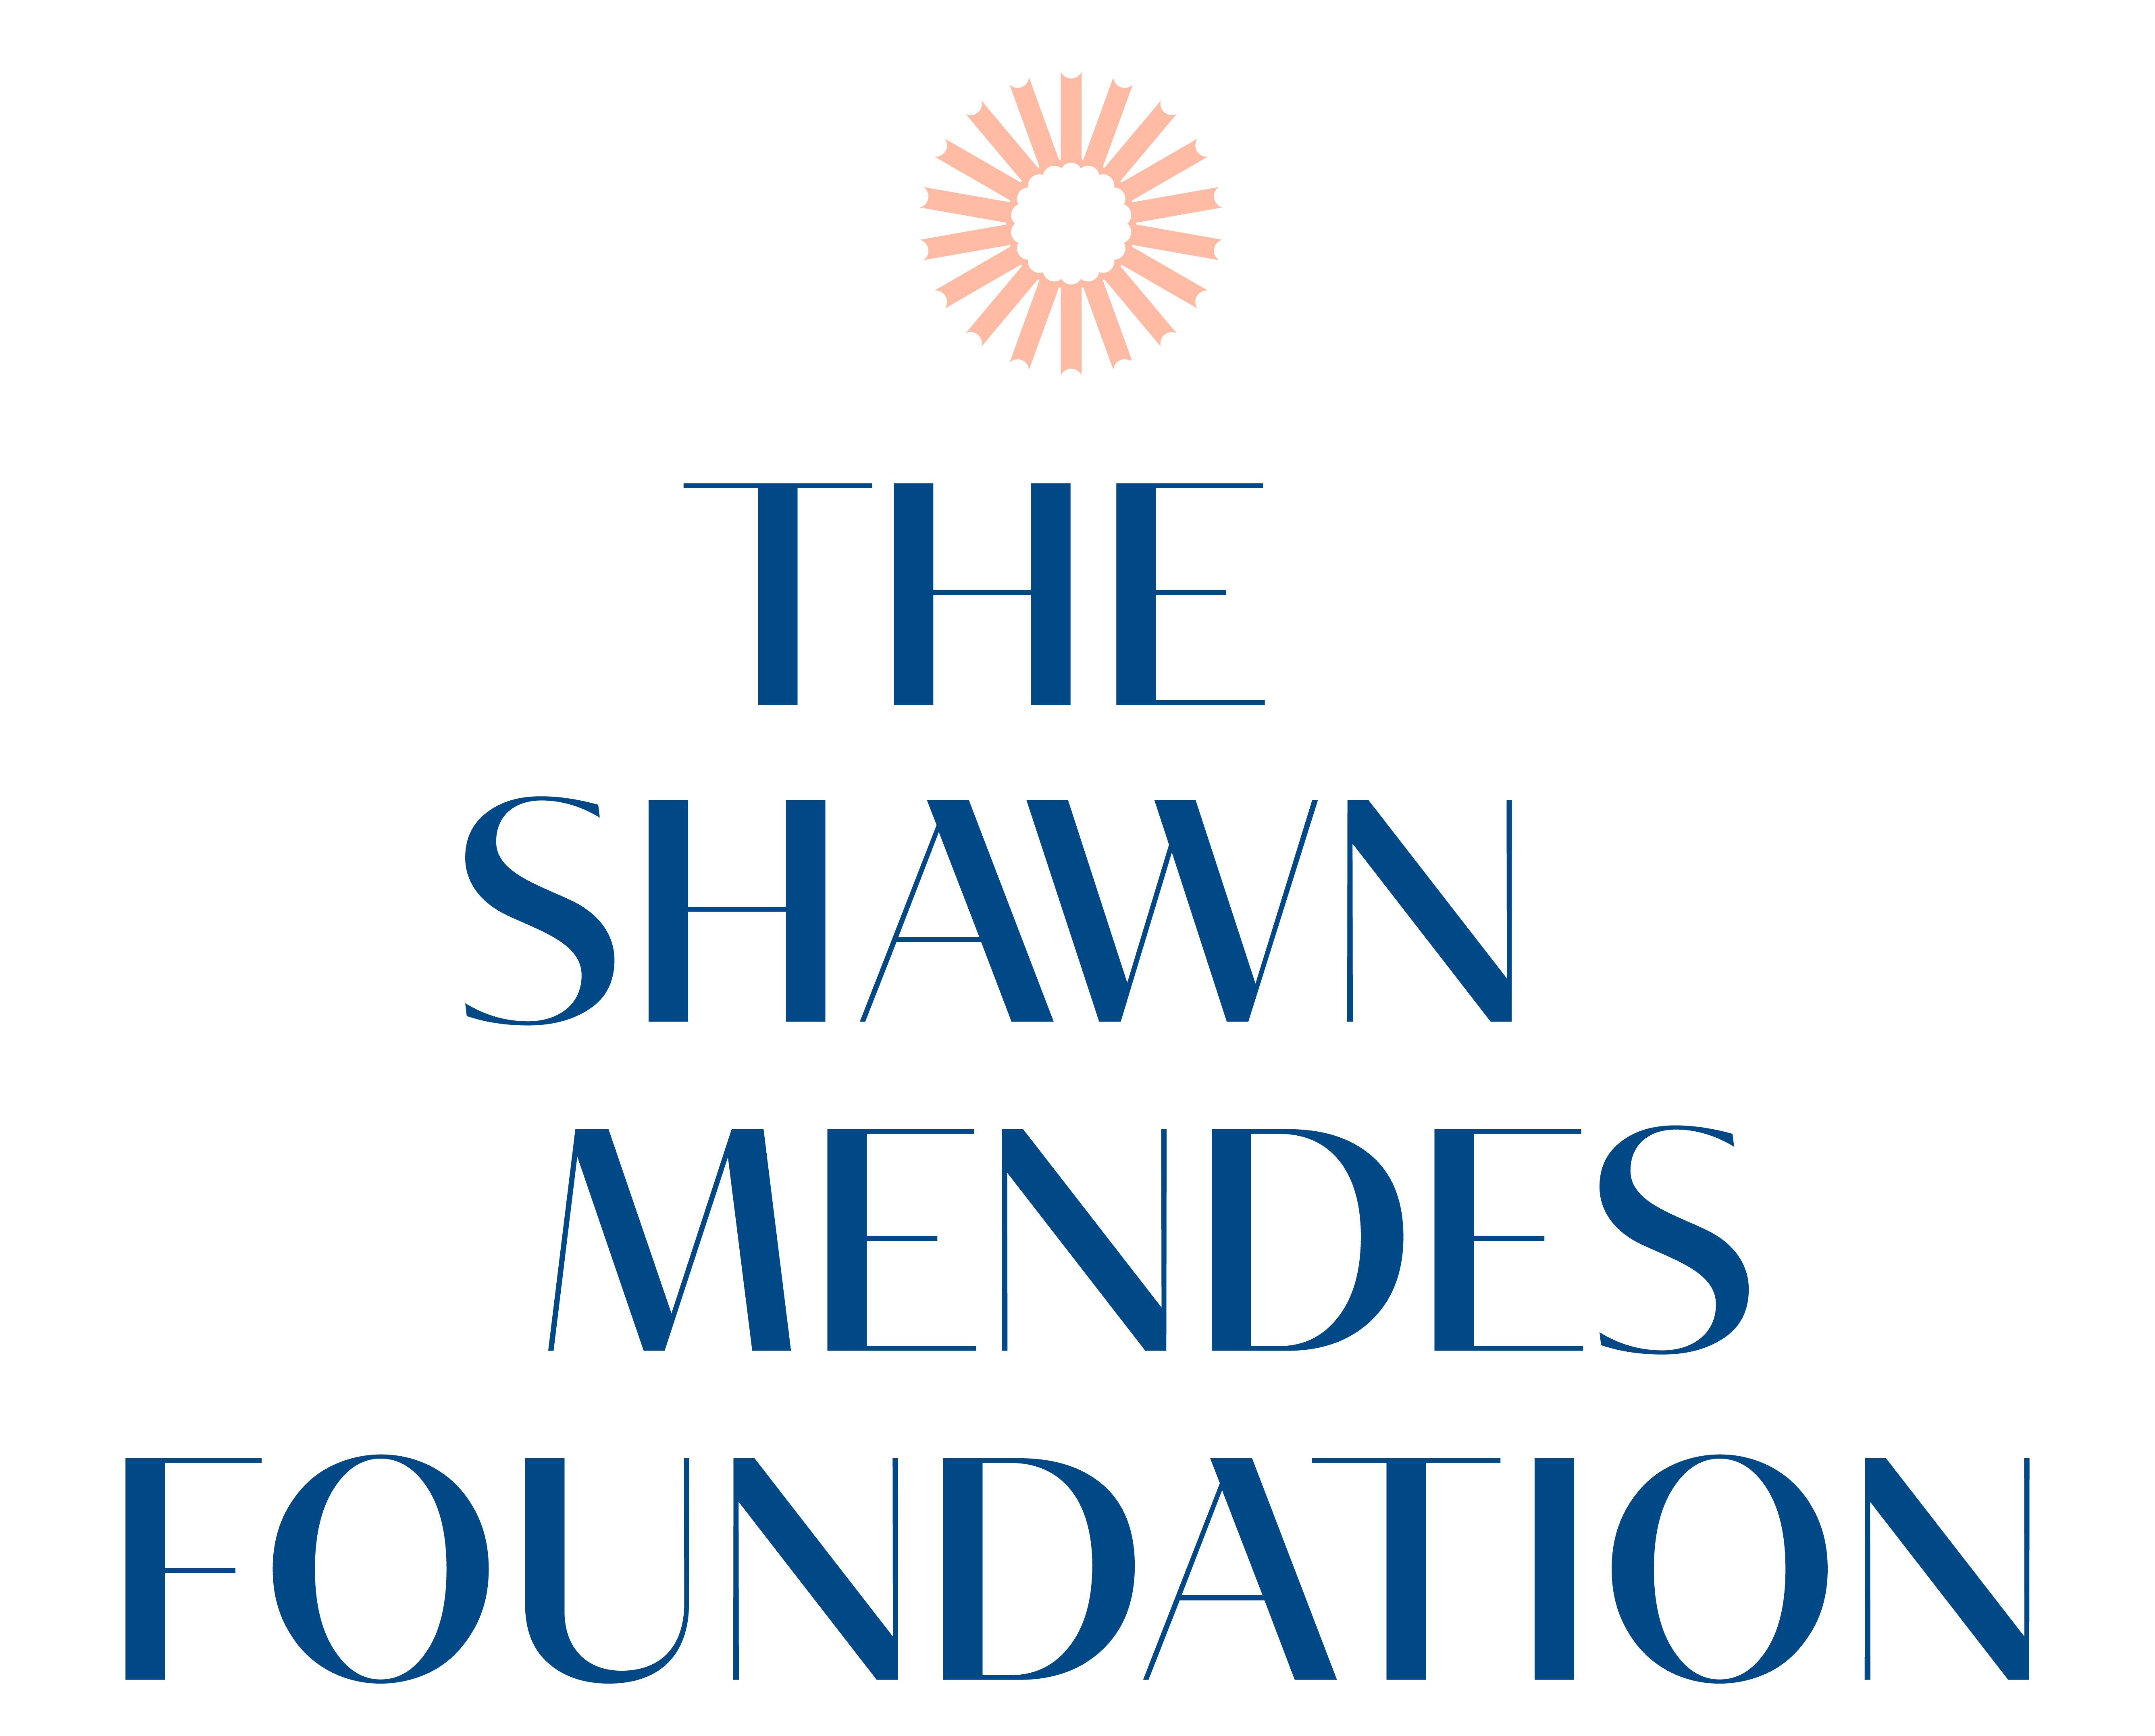 Shawn Mendes Foundation